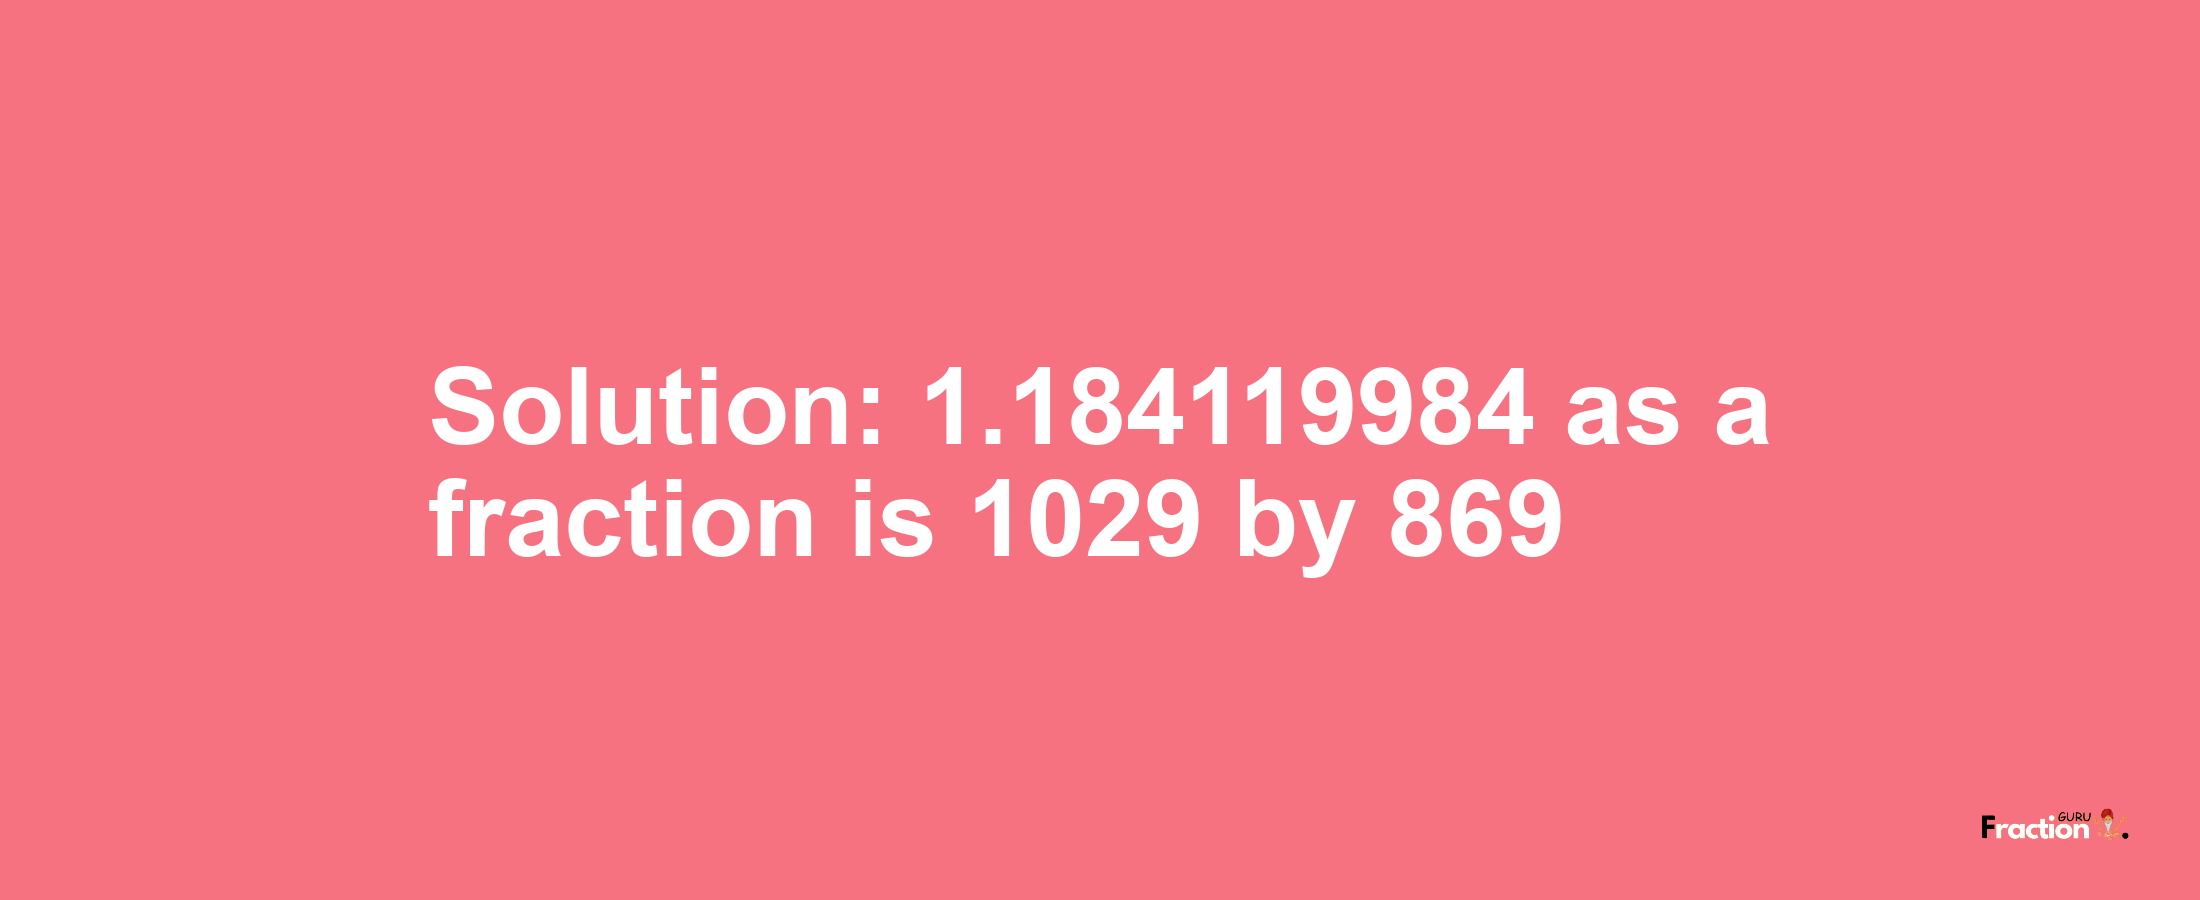 Solution:1.184119984 as a fraction is 1029/869